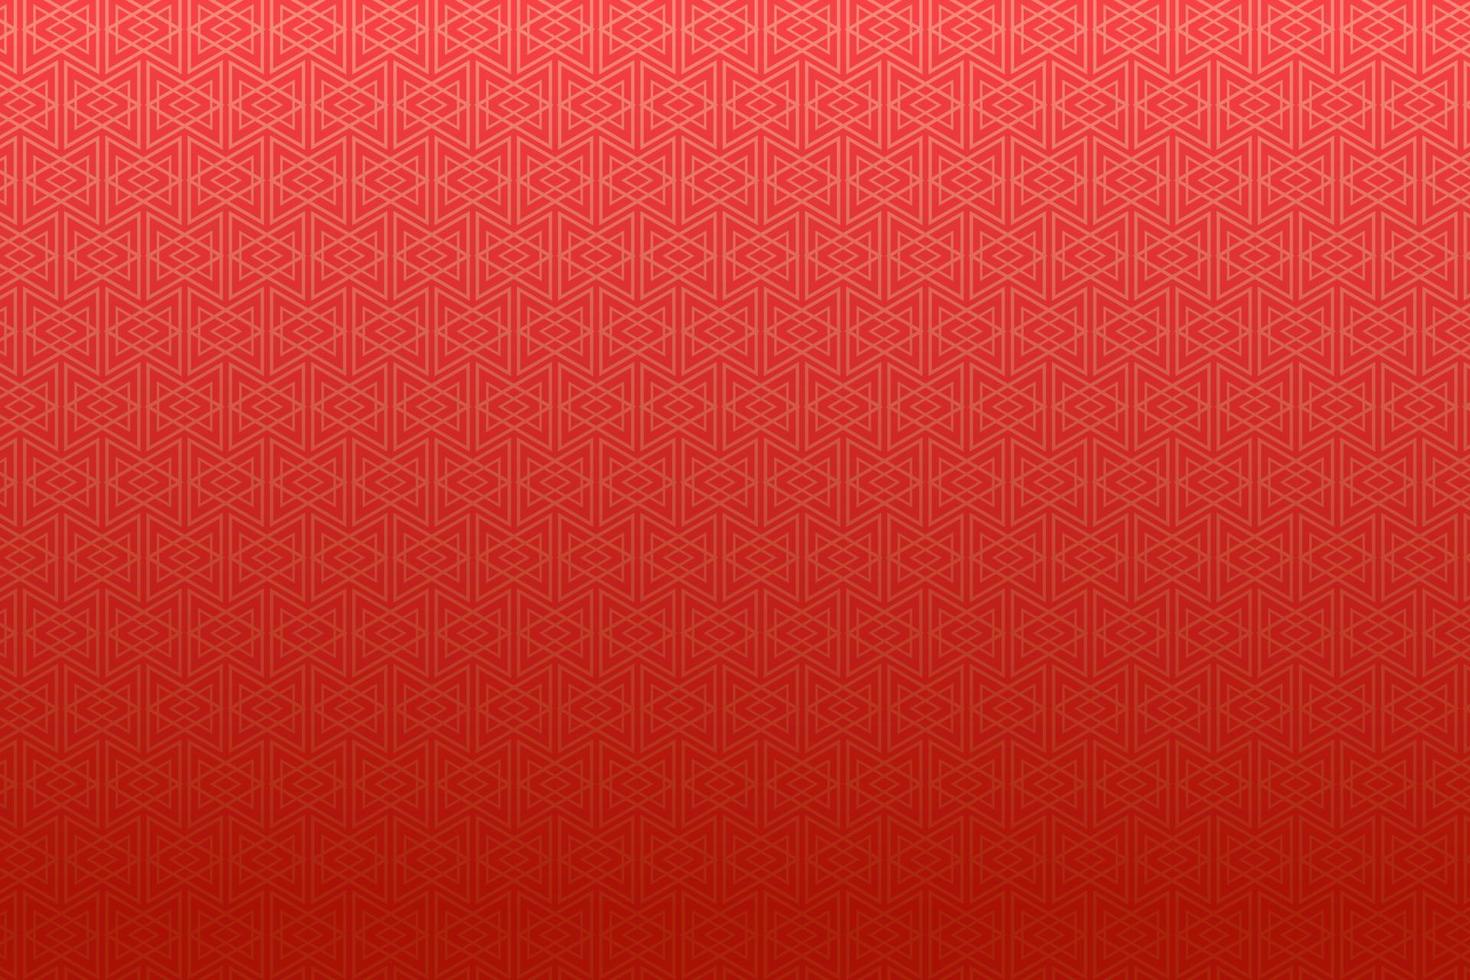 Pattern with geometric elements in red tones gradient abstract background vector